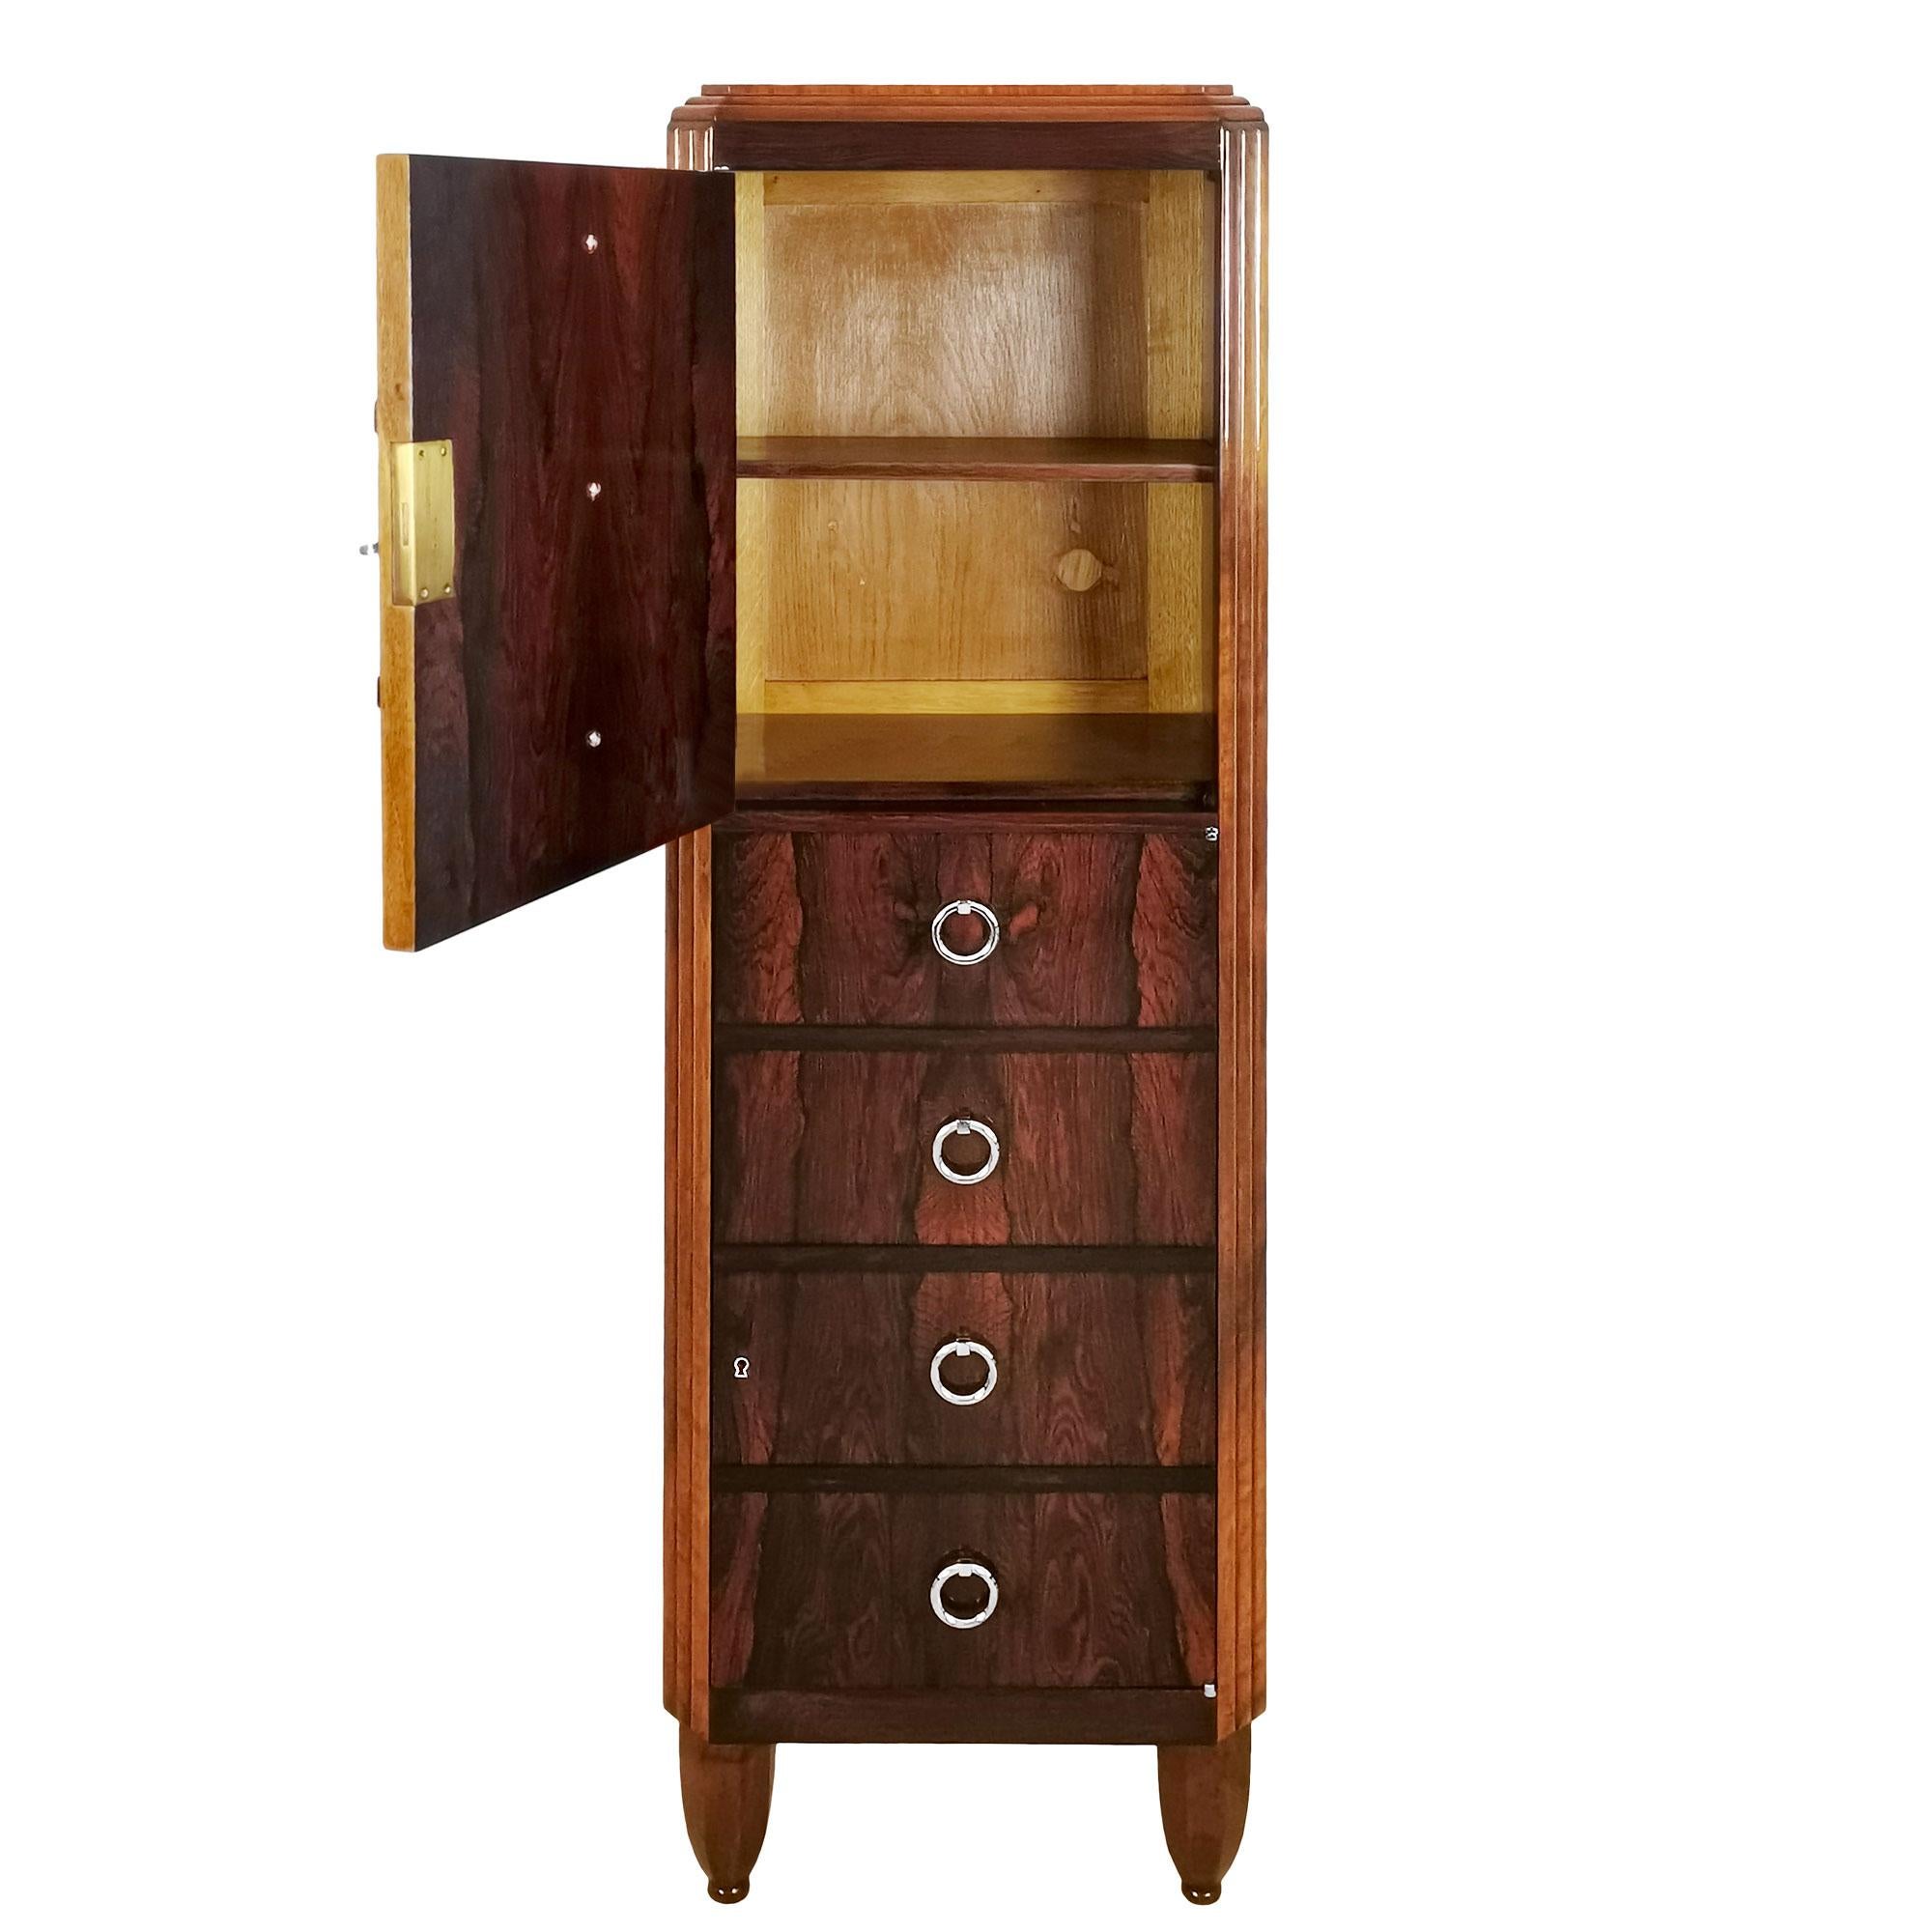 Polished False Art Deco “Semainier” with Doors in Solid Oak - France, 1920-25 For Sale